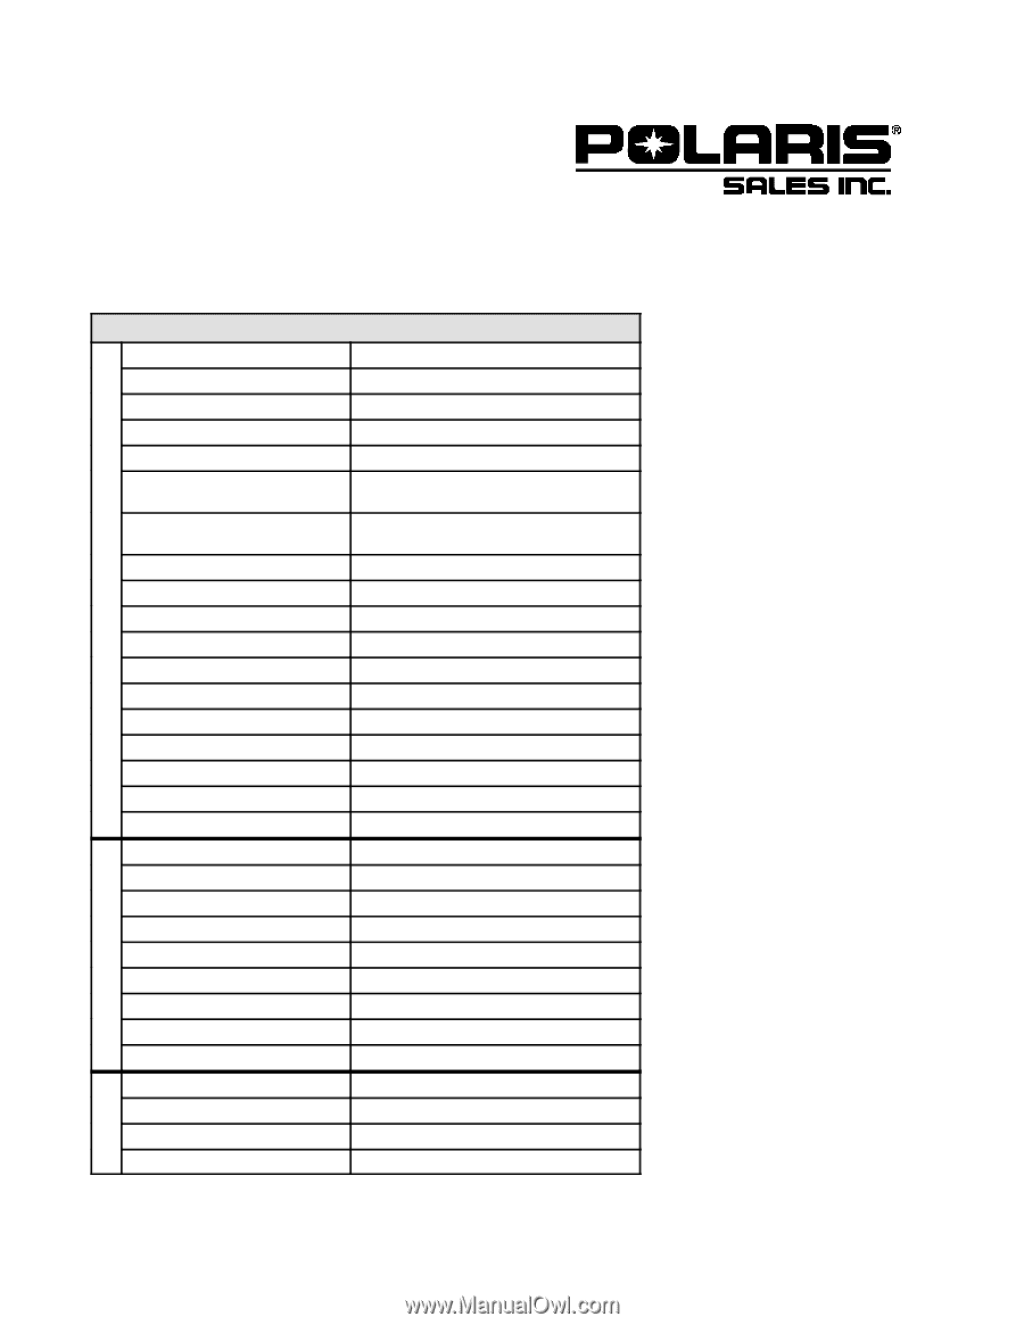 Picture of: Polaris Sport   Owners Manual